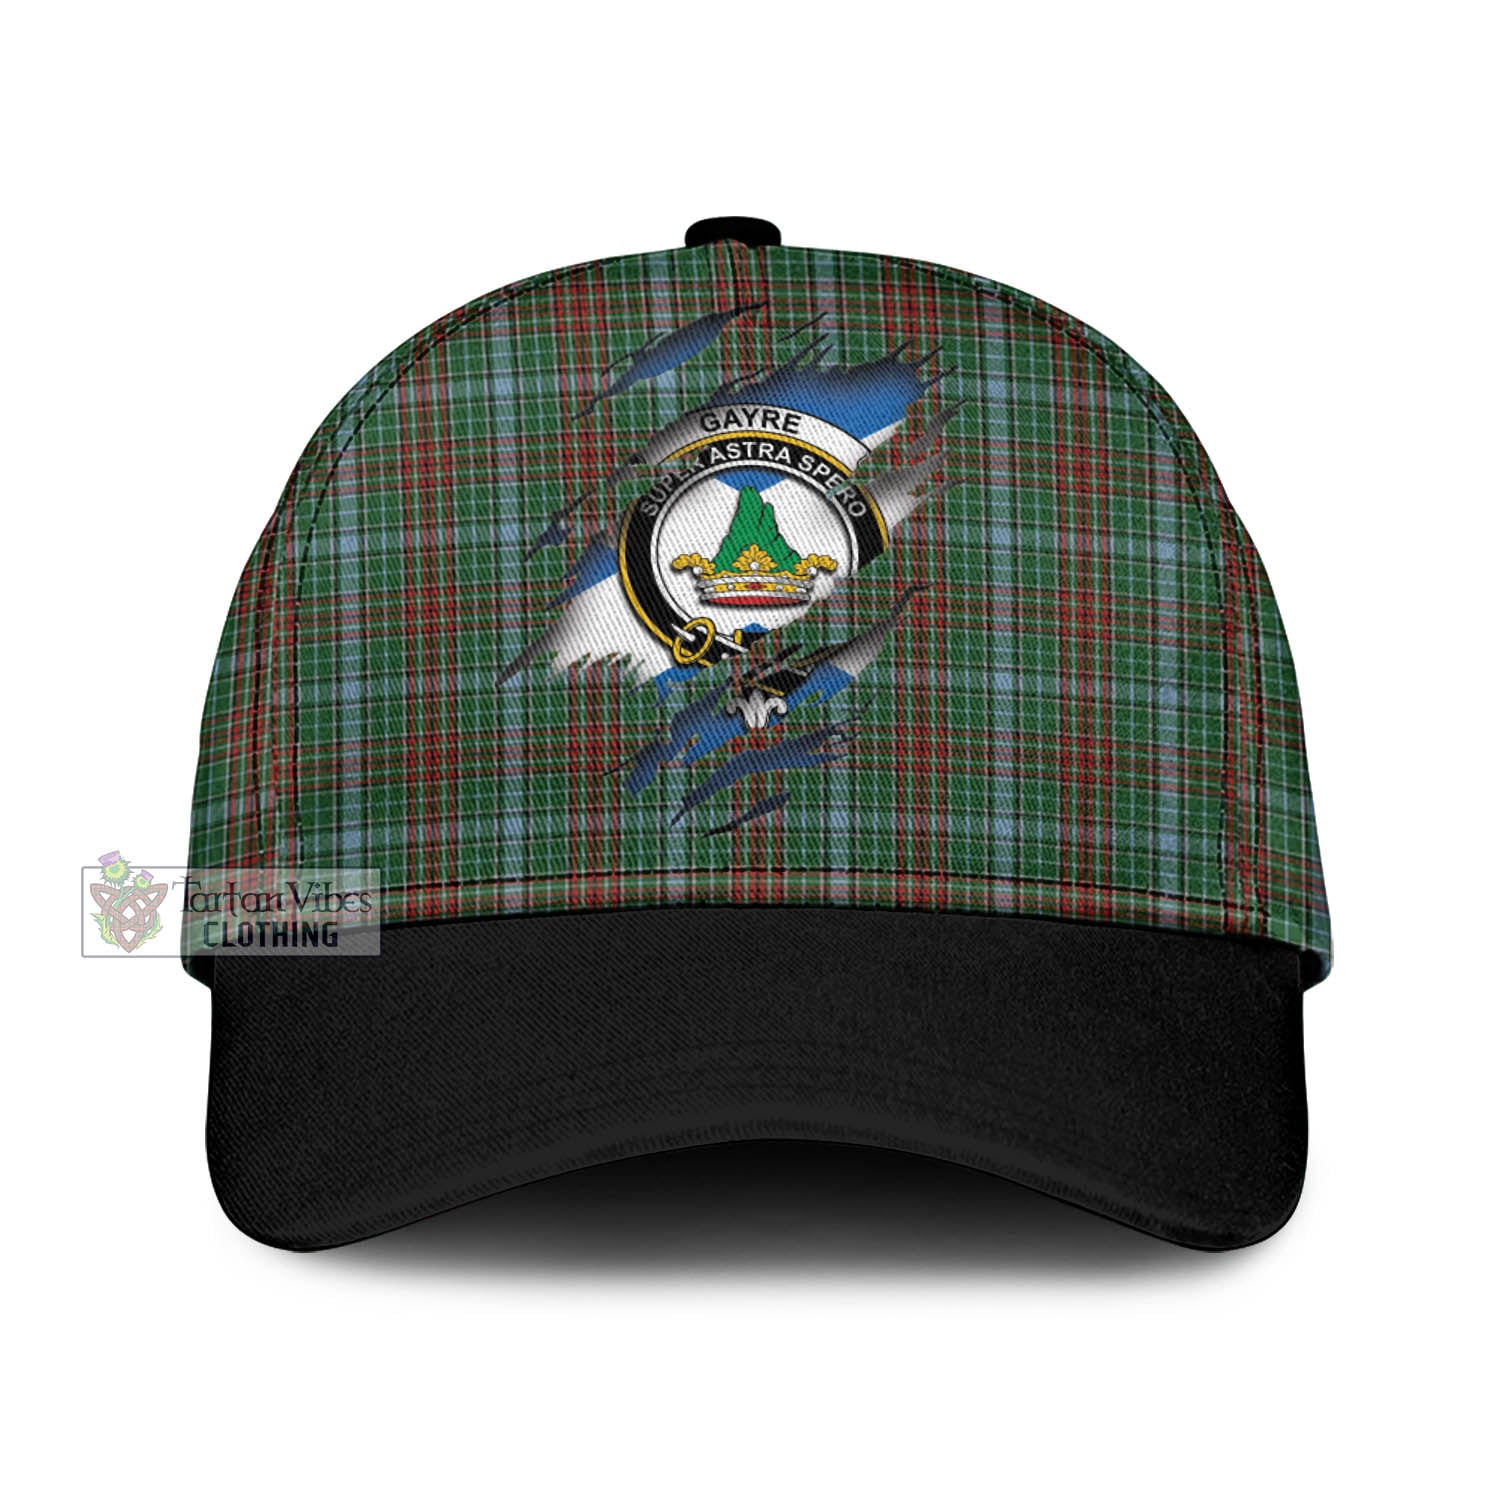 Tartan Vibes Clothing Gayre Tartan Classic Cap with Family Crest In Me Style